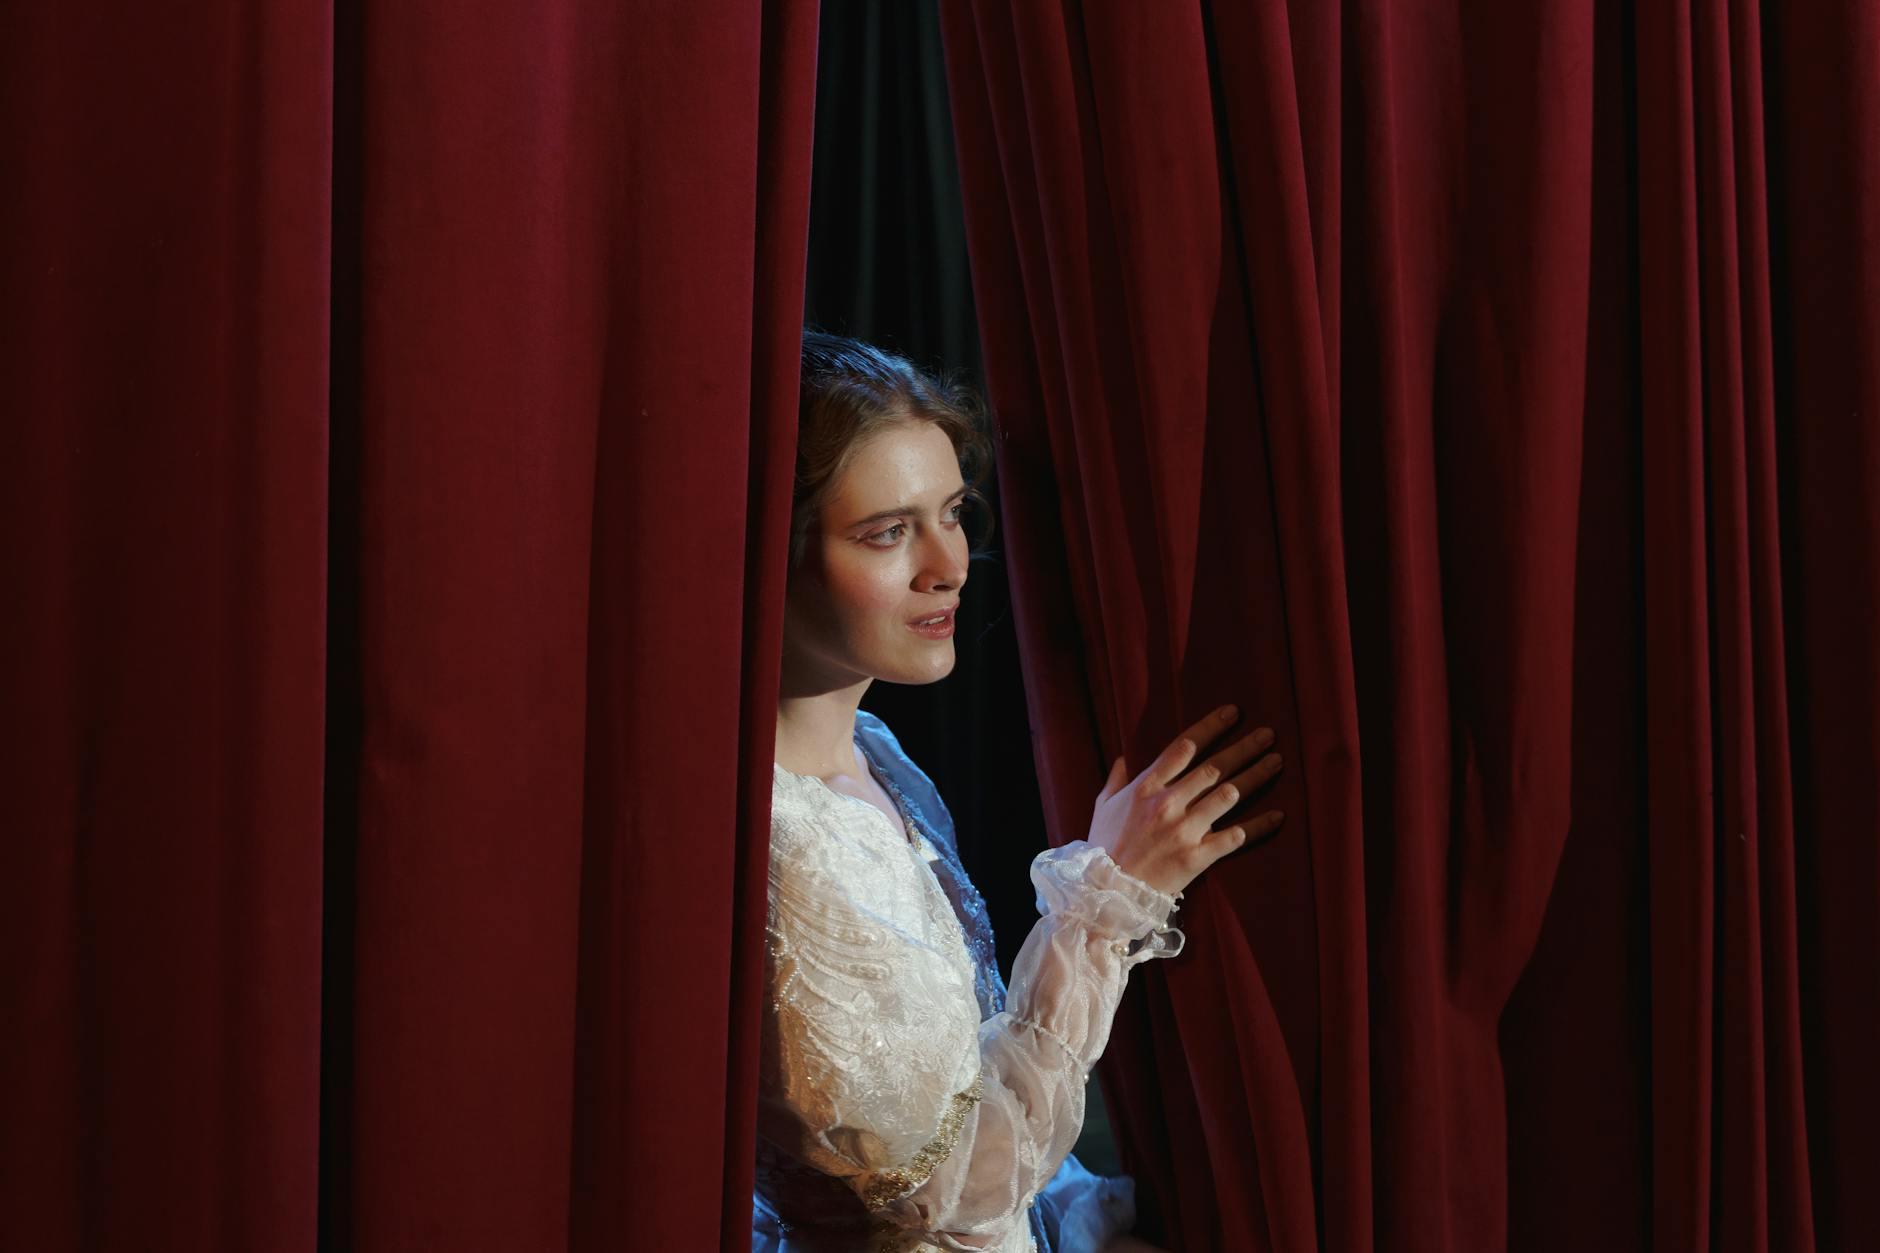 Woman in White Floral Lace Dress Standing Behind a Curtain